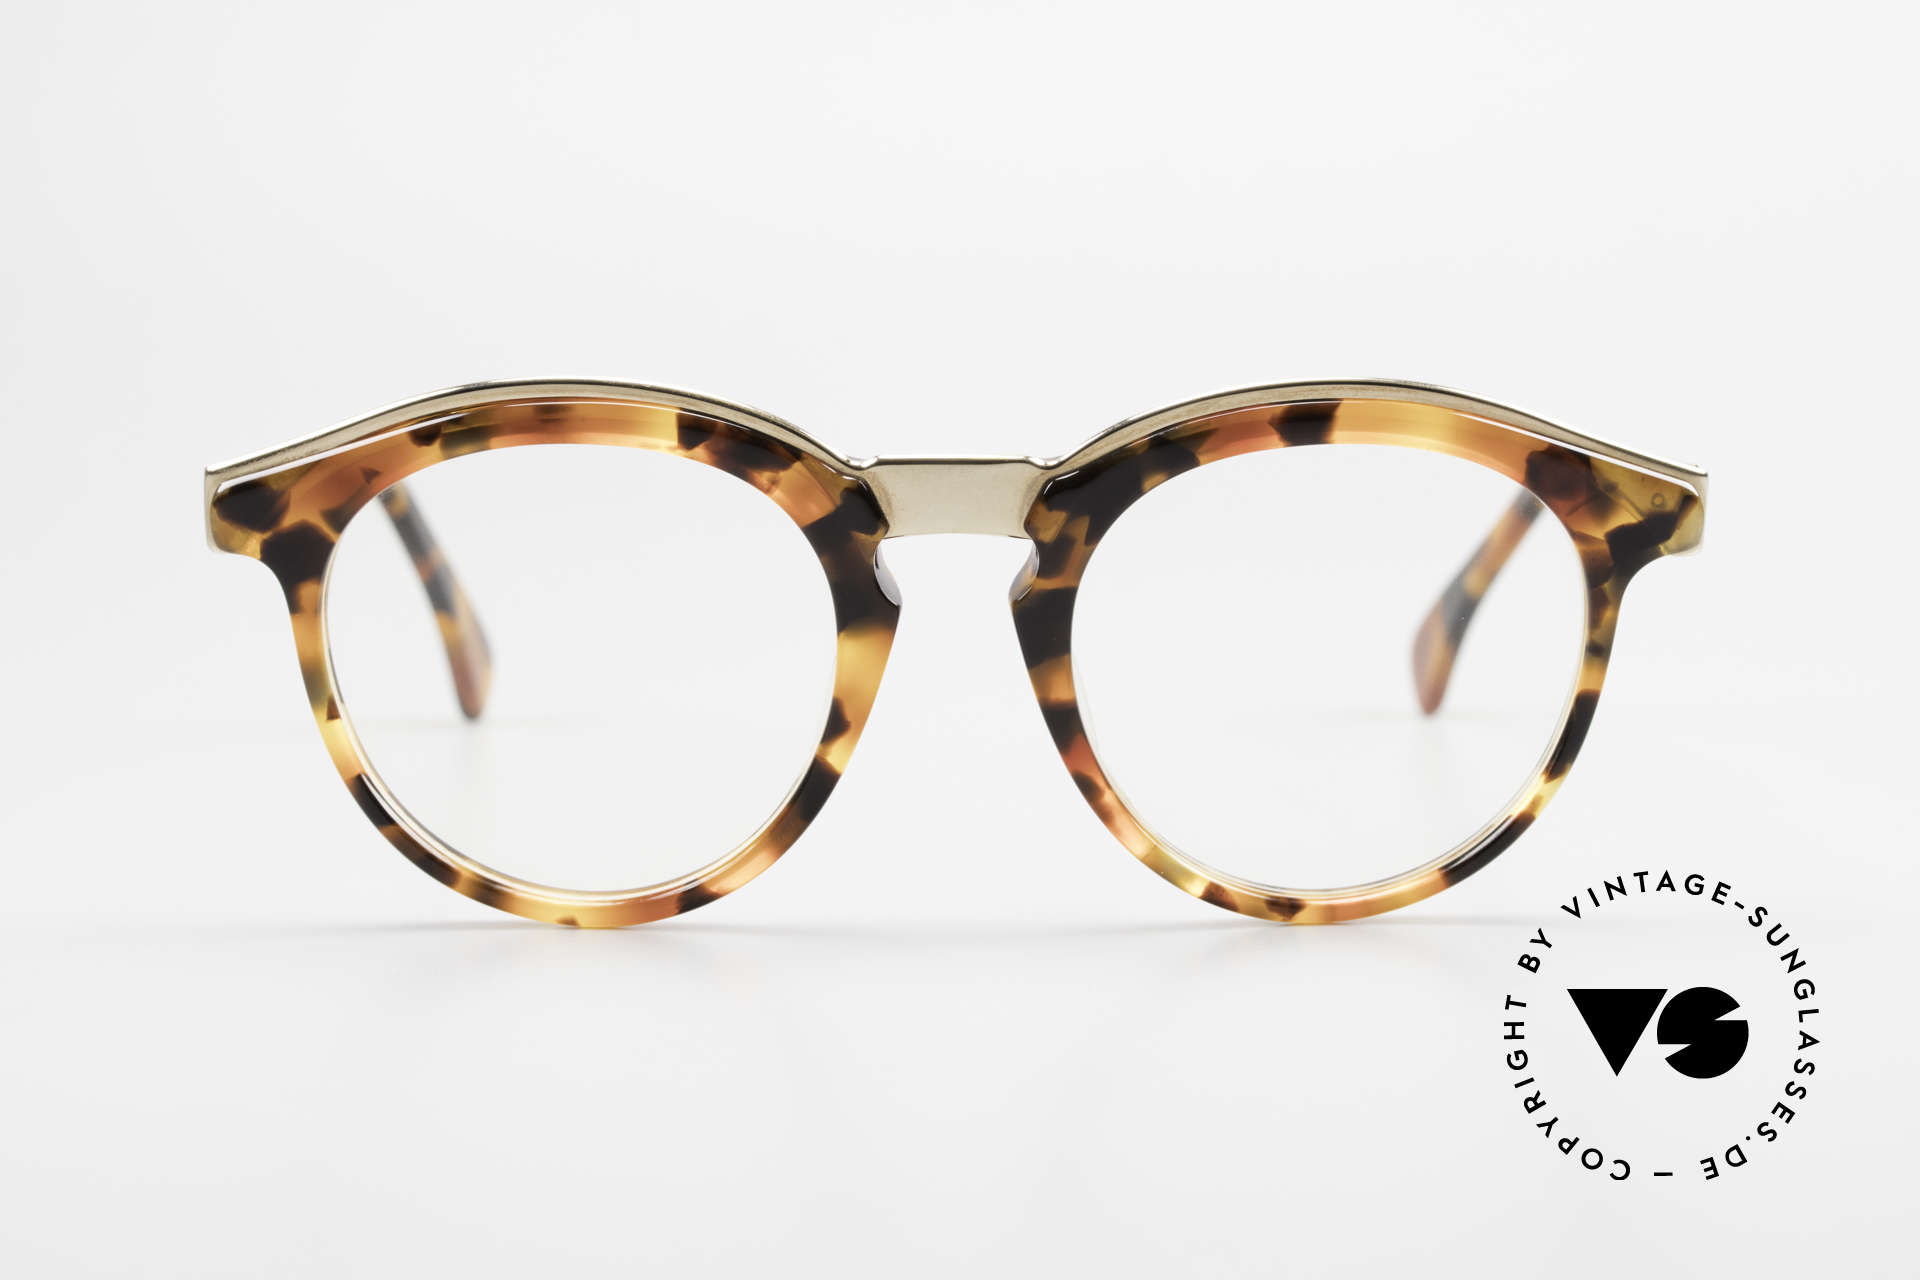 Alain Mikli 626 / 281 Old 80's Vintage Panto Glasses, model 626 / 281 = a true design classic from 1989, Made for Men